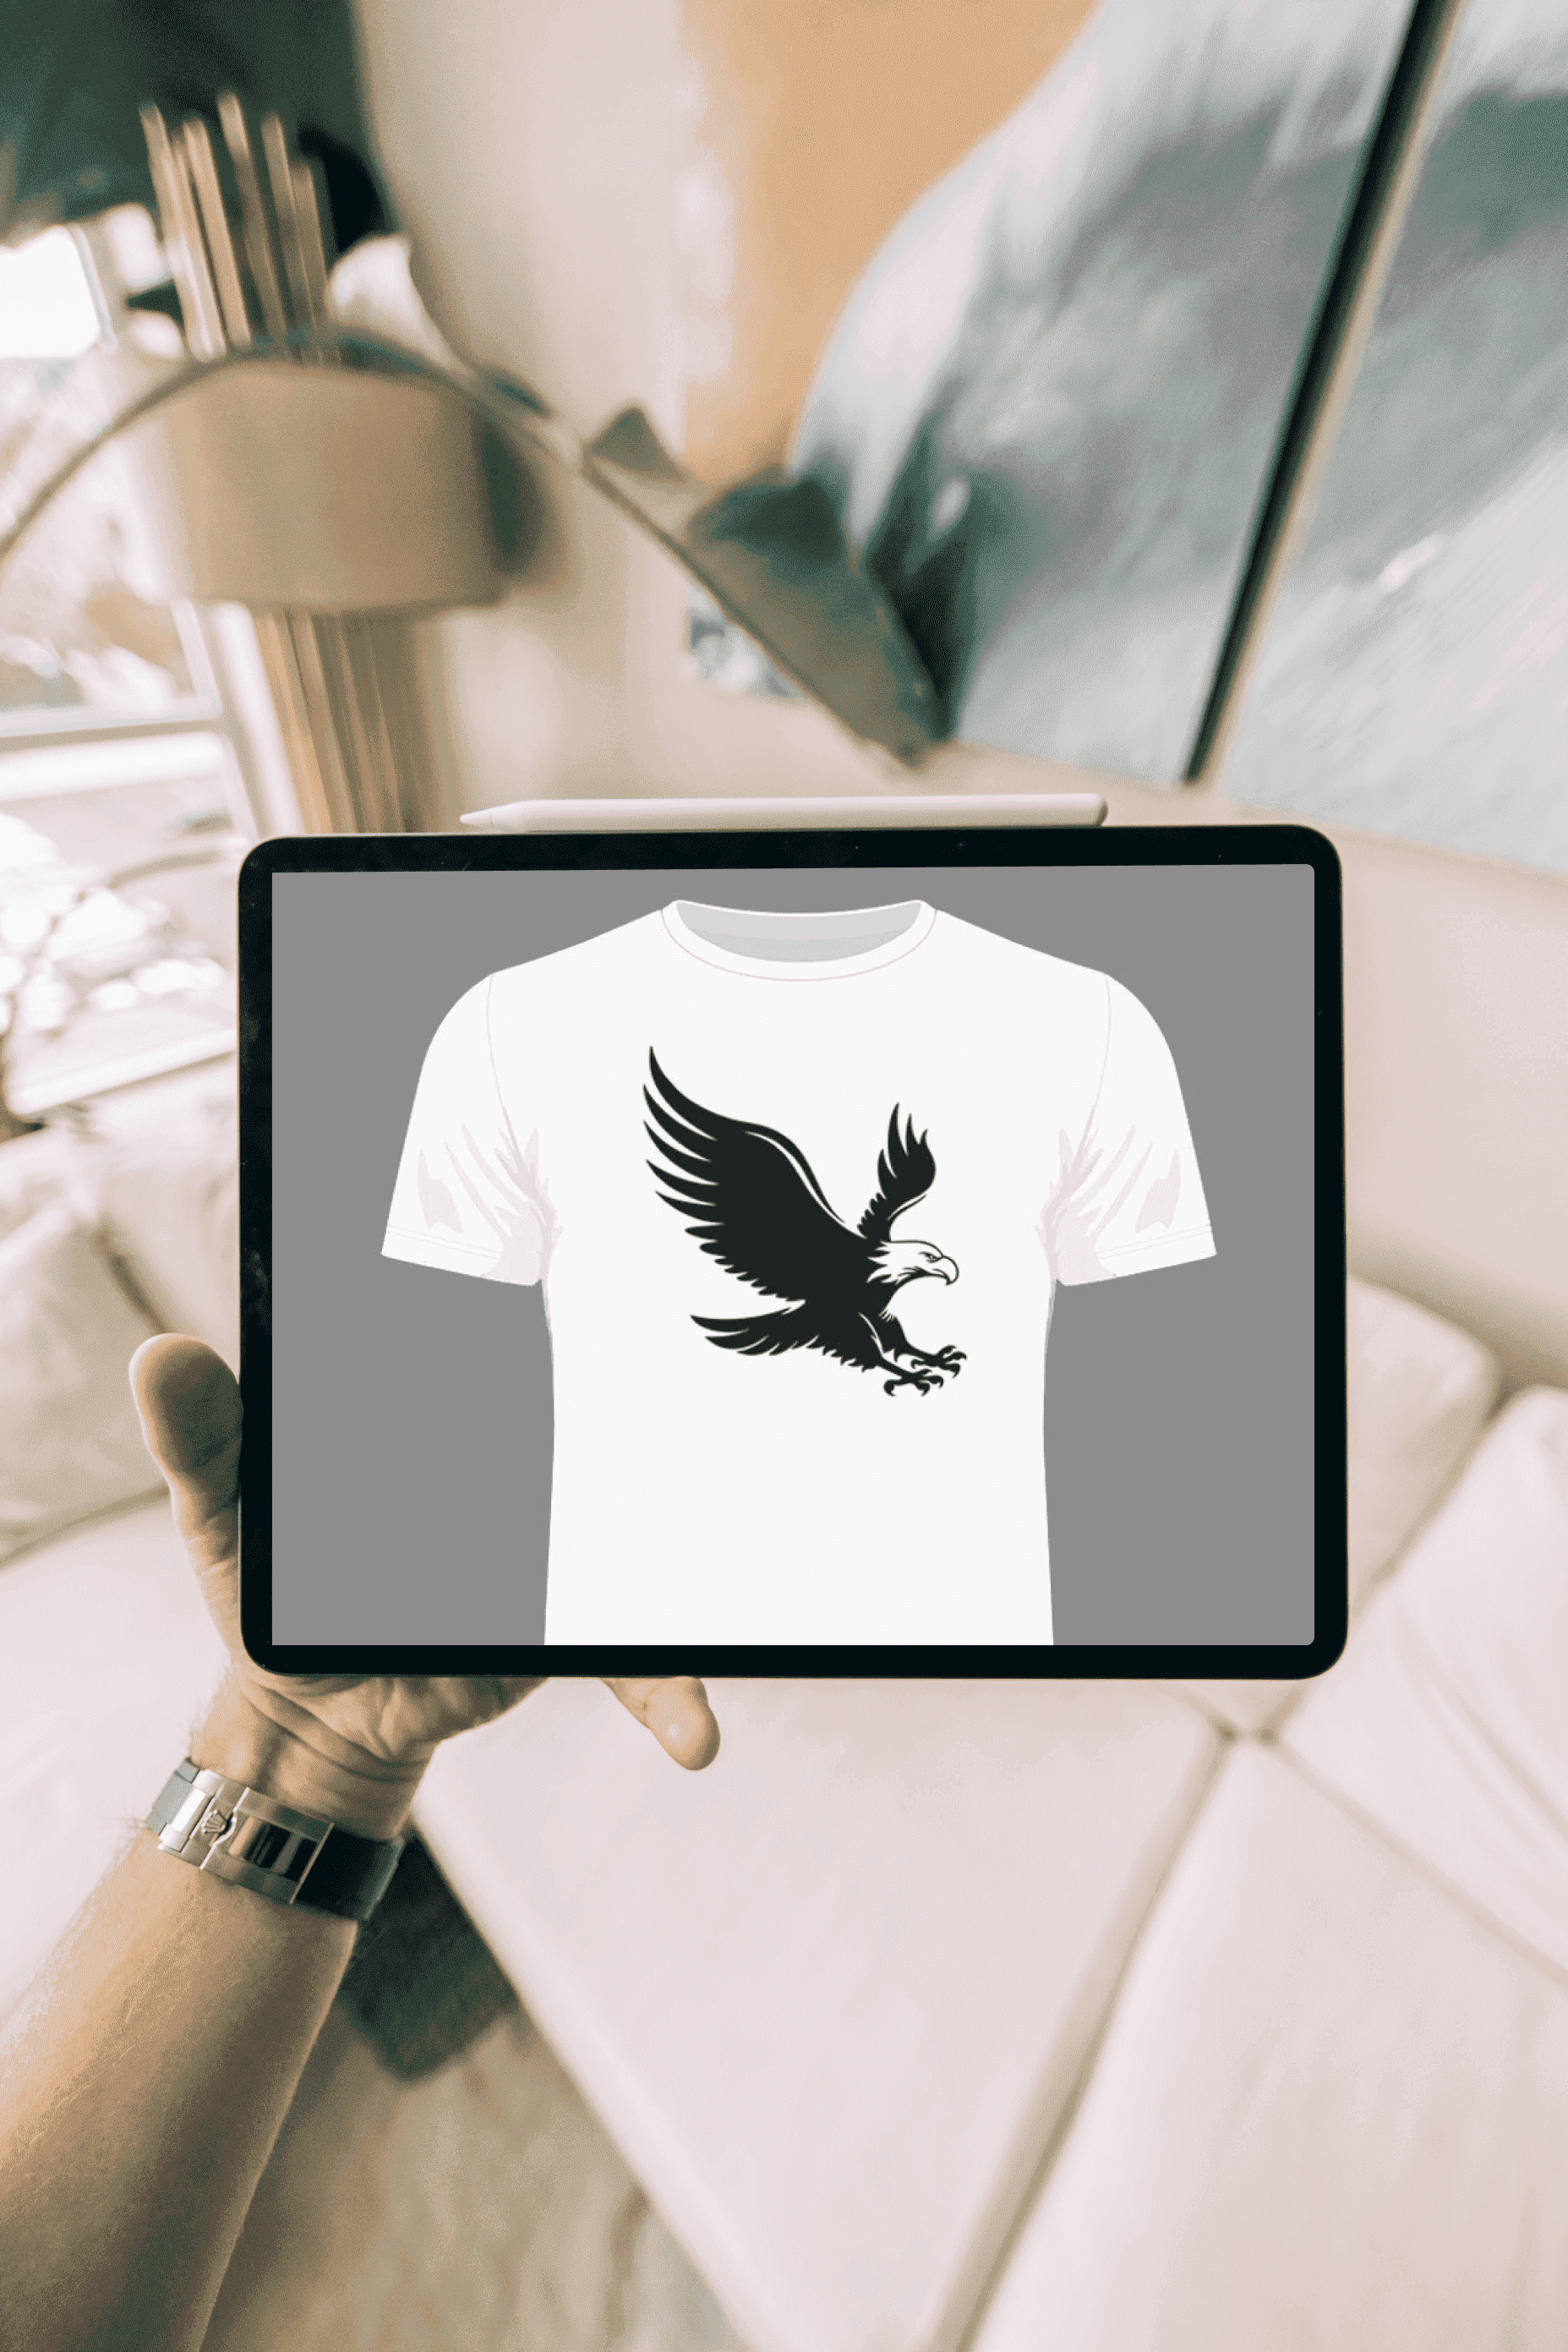 Person holding up a t - shirt with a bird on it.